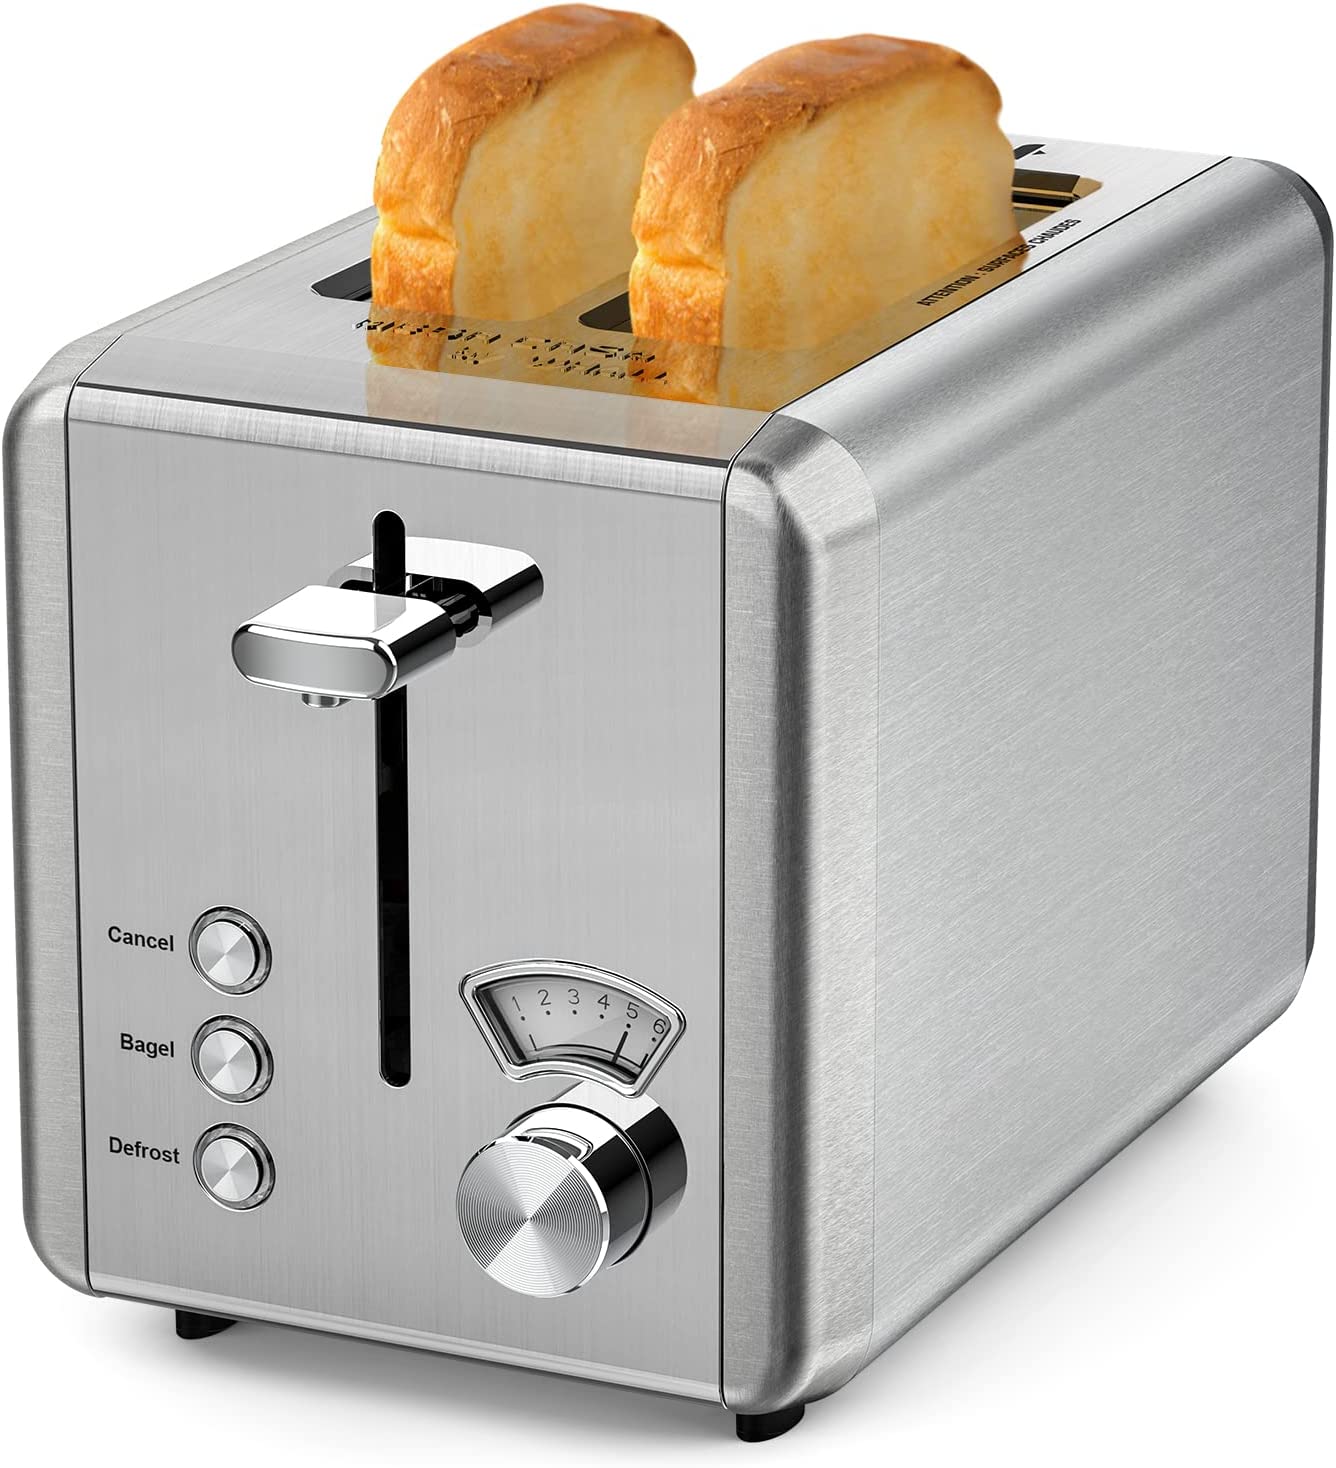 WHALL Long Slot Toaster 4 Slice Brushed Stainless Steel Toaster, 7 Toast Settings